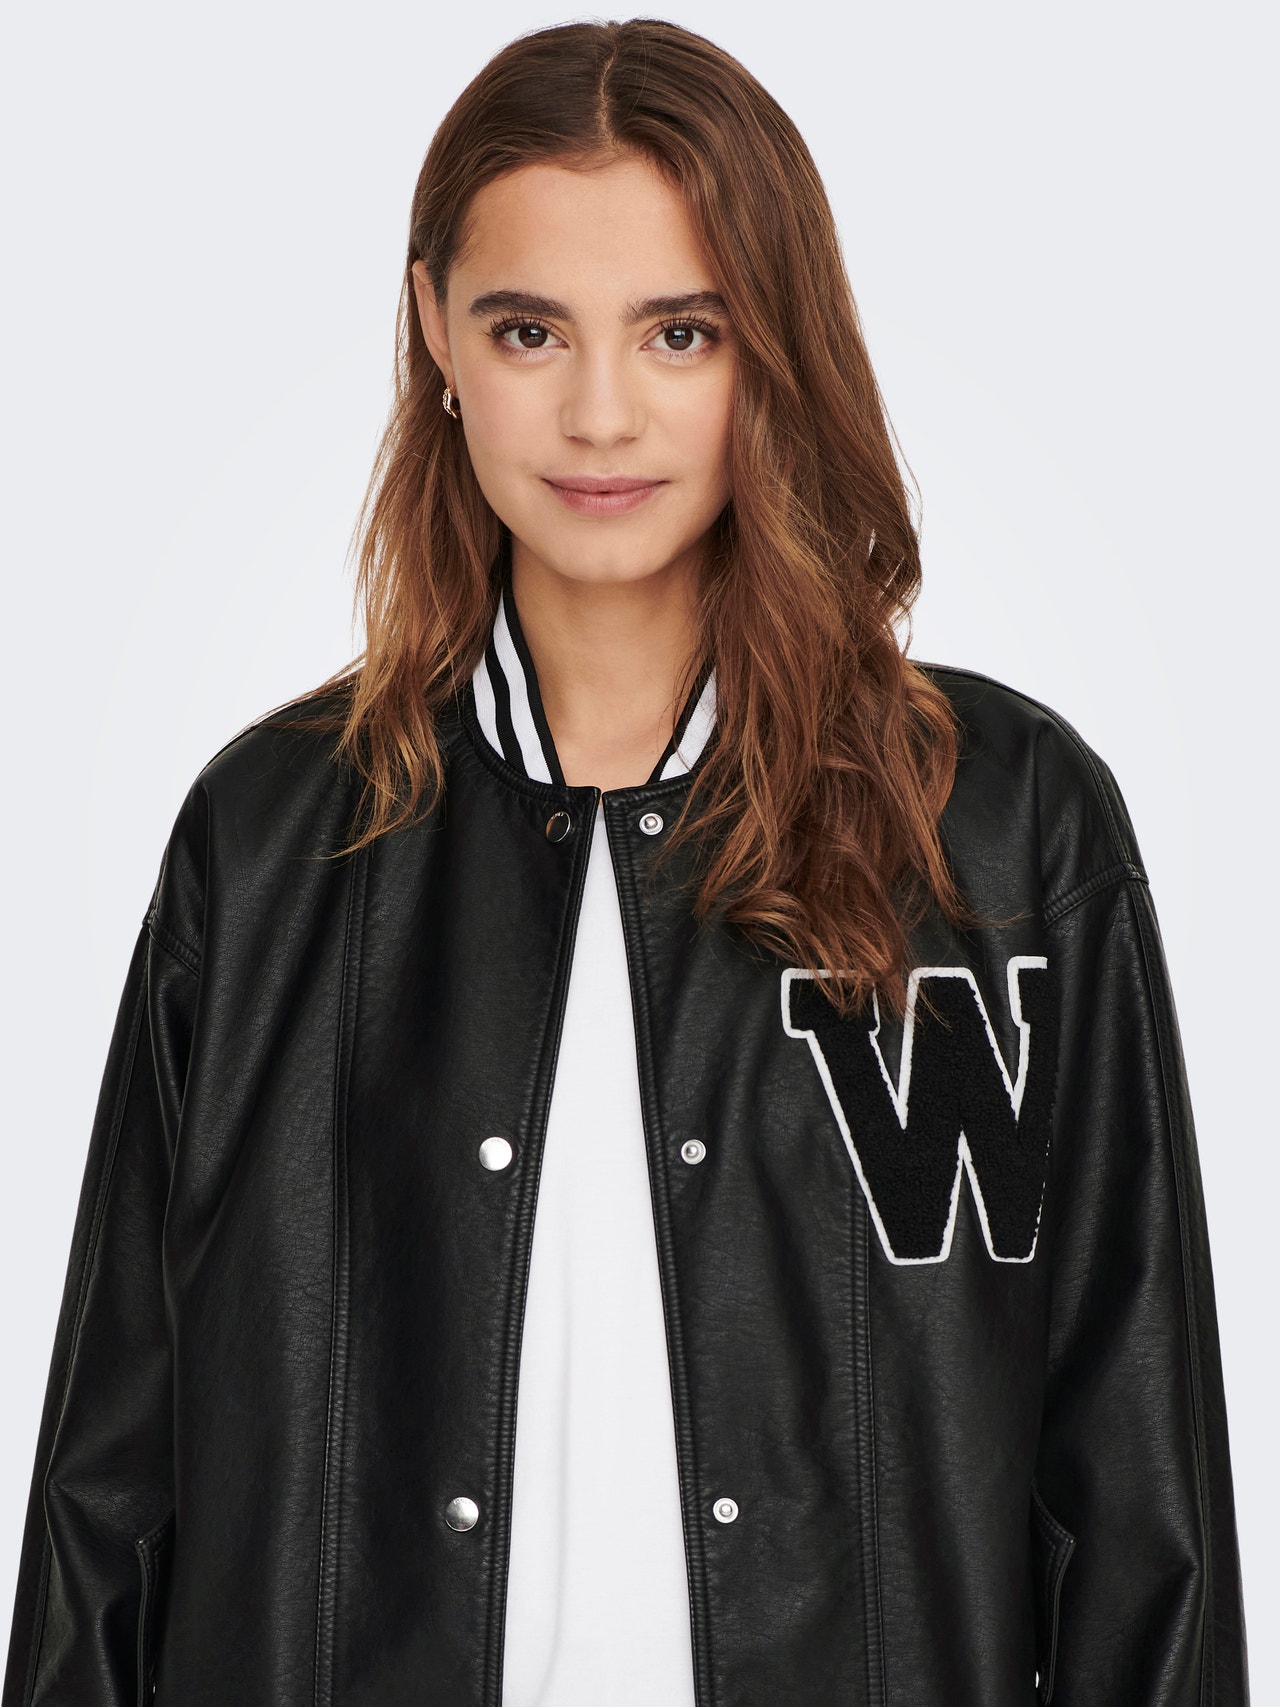 ONLY Faux leather bomber jacket -Black - 15277722